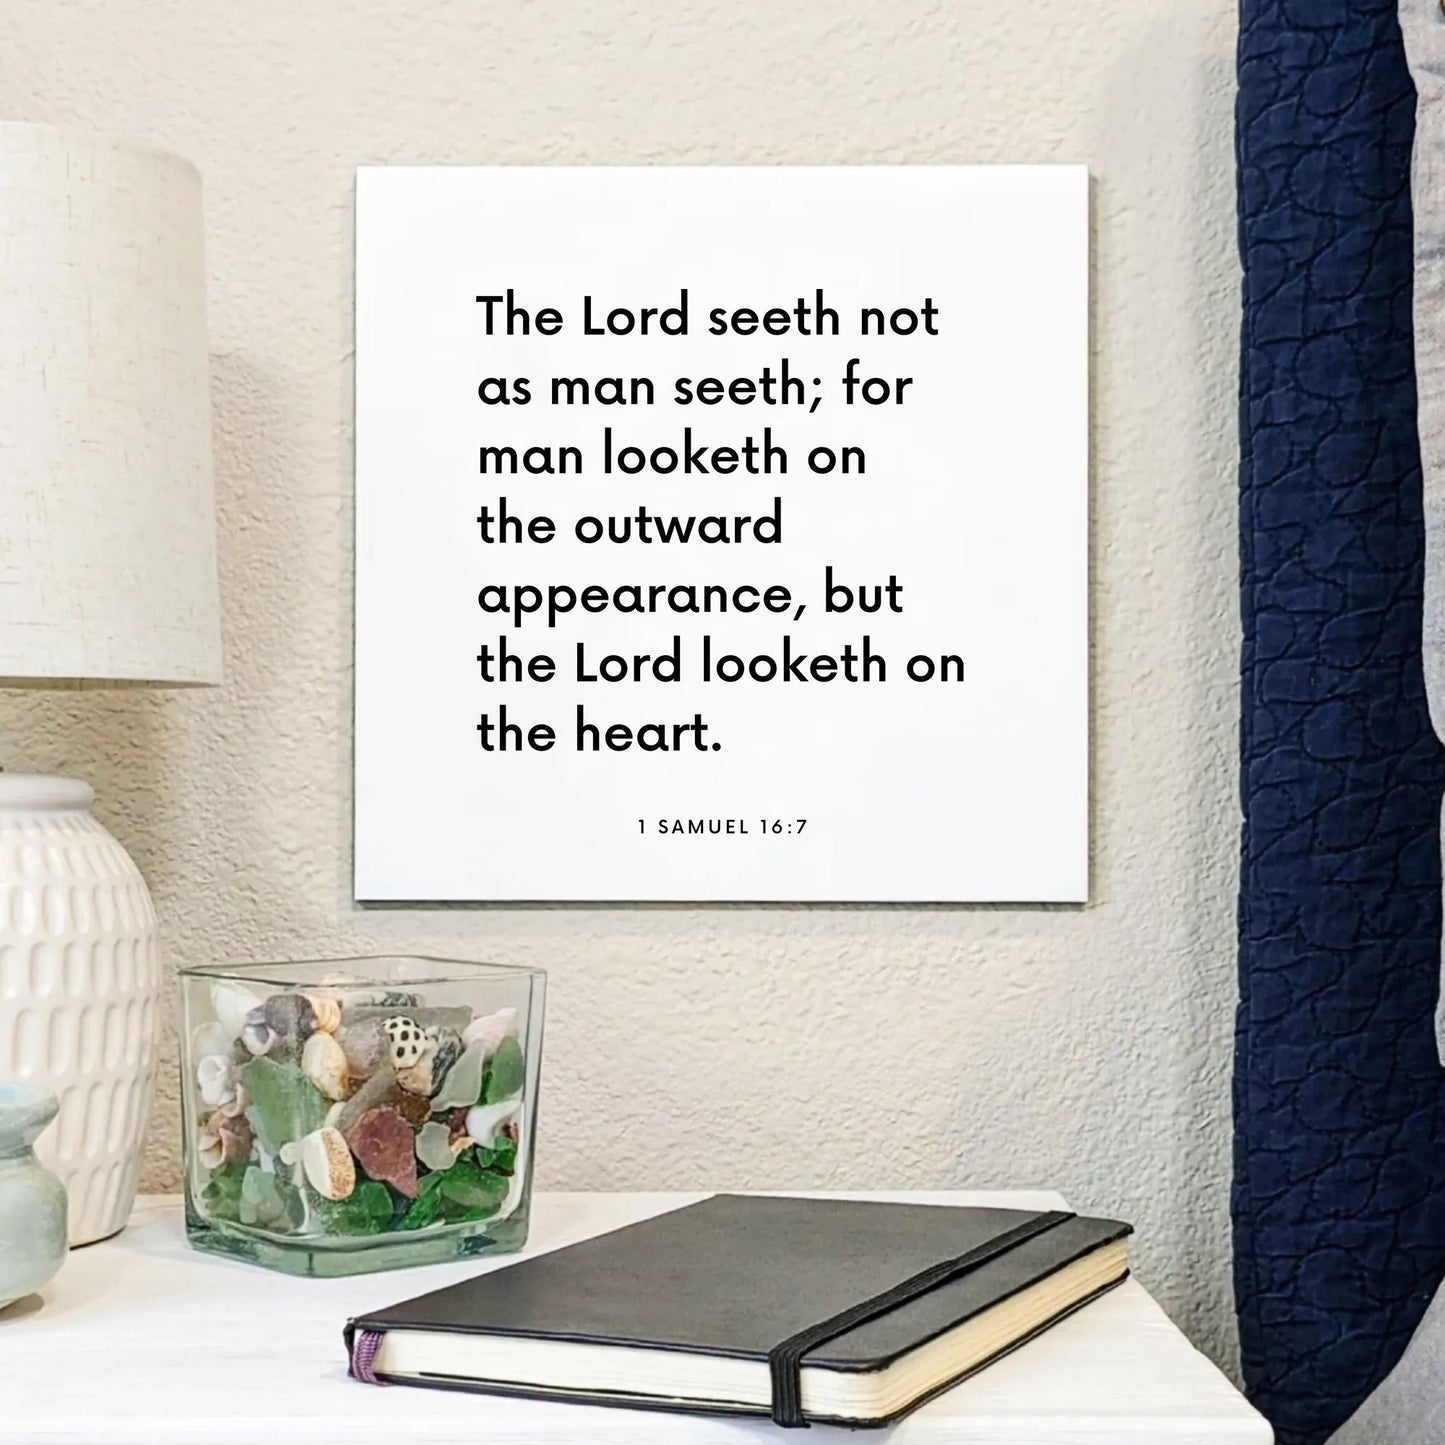 Bedside mouting of the scripture tile for 1 Samuel 16:7 - "The Lord seeth not as man seeth"